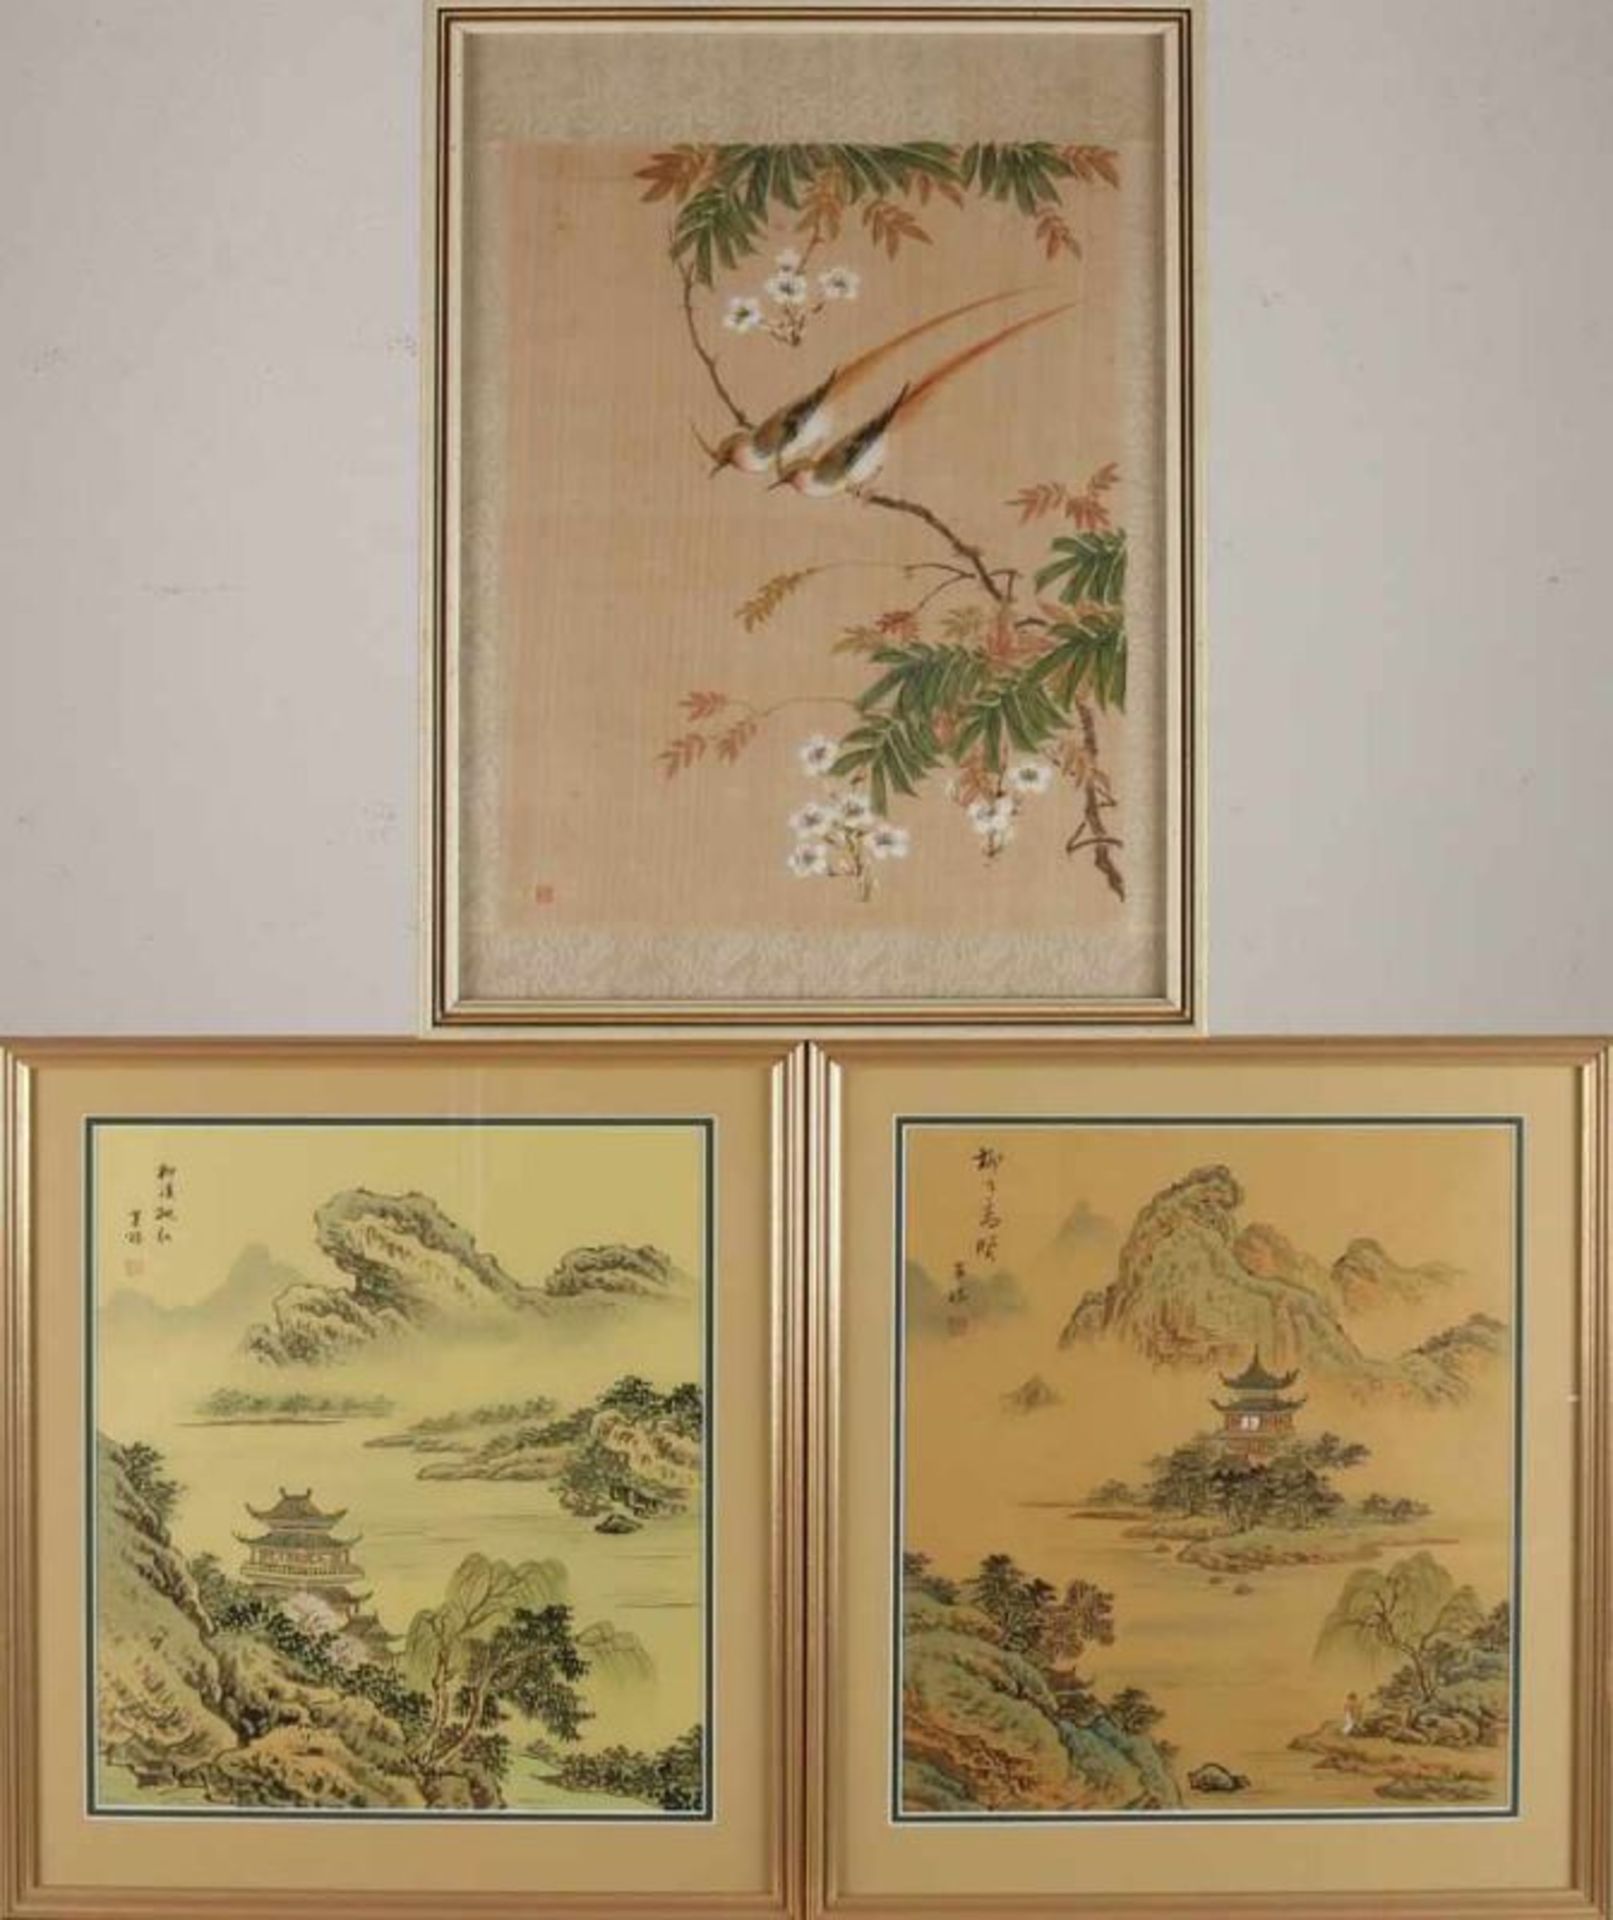 Three ancient Chinese works on silk. Signed. 20th century. Dimensions: 36 x H, B 30 cm. In good